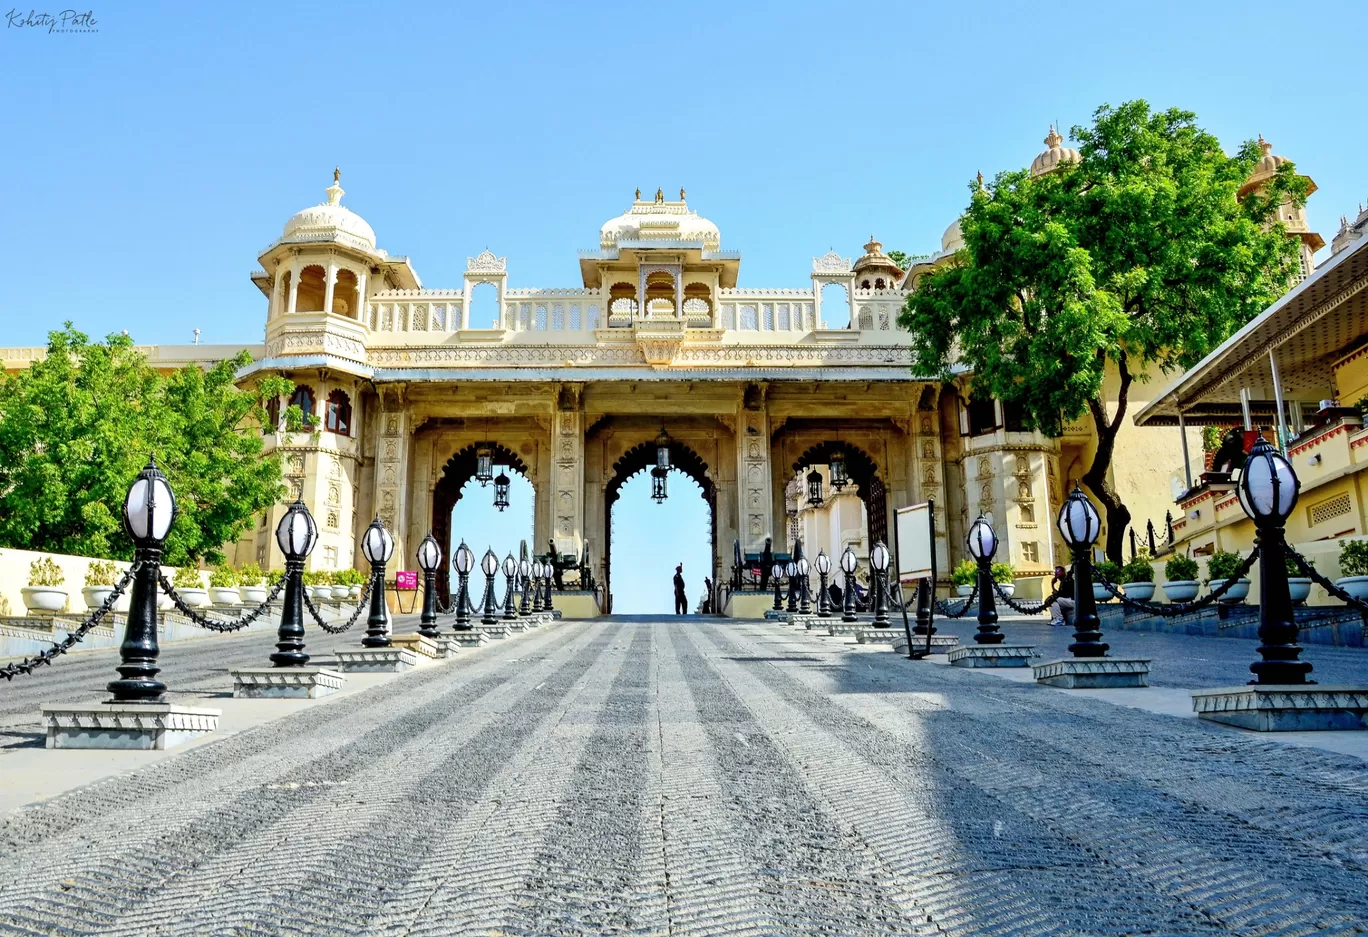 Photo of Udaipur By Kshitij Patle